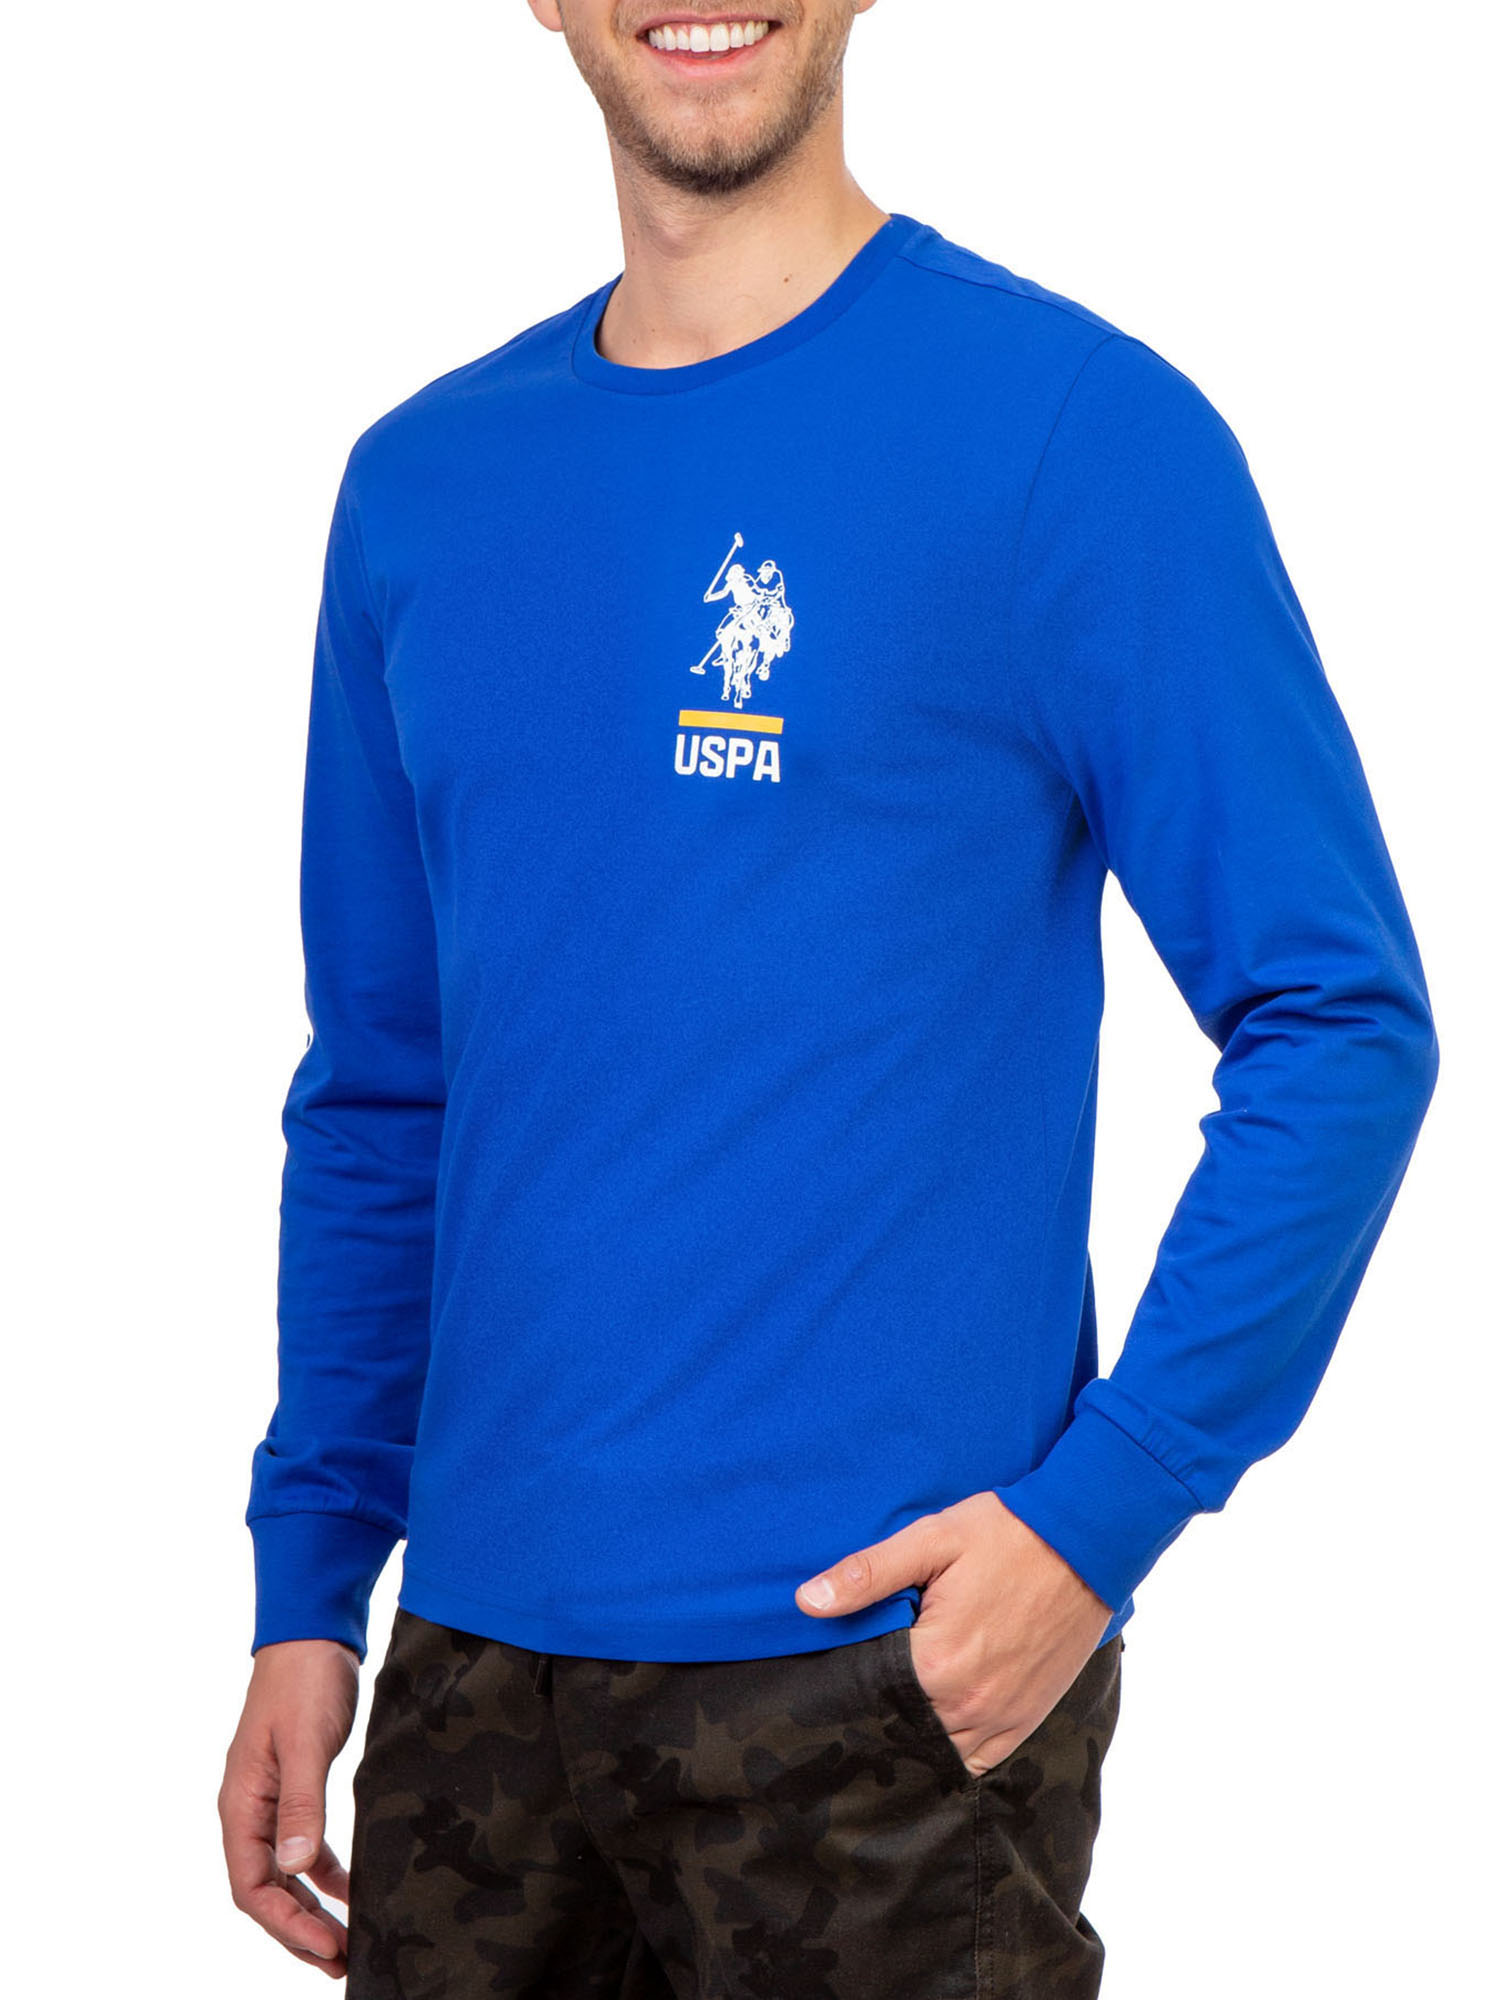 U.S. Polo Assn. Men's and Big Men's Long Sleeve Graphic T-Shirt - image 1 of 3